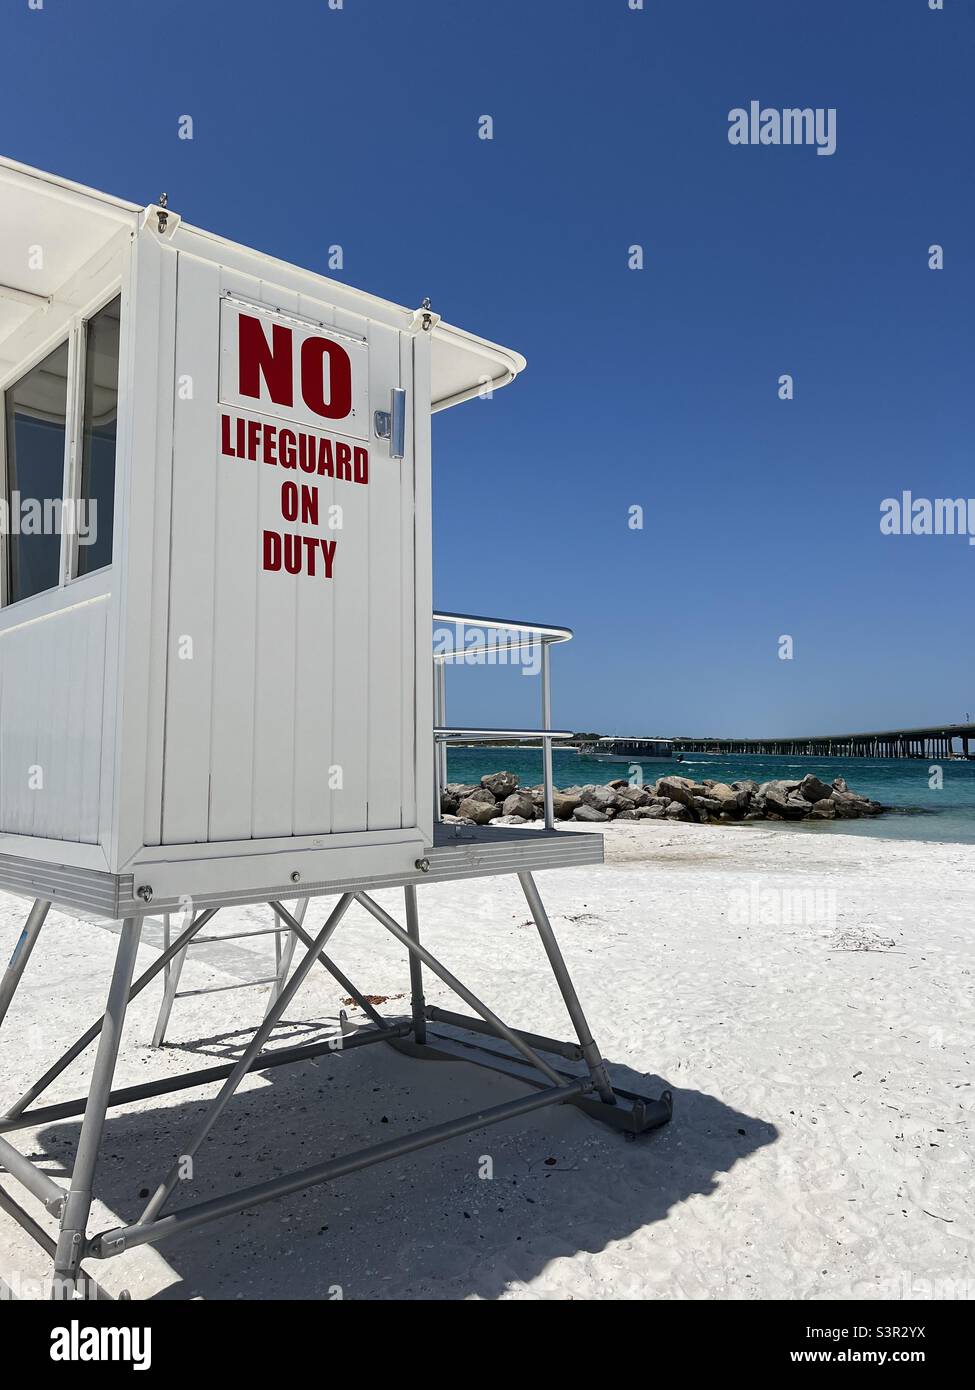 Empty lifeguard stand on the beach Stock Photo